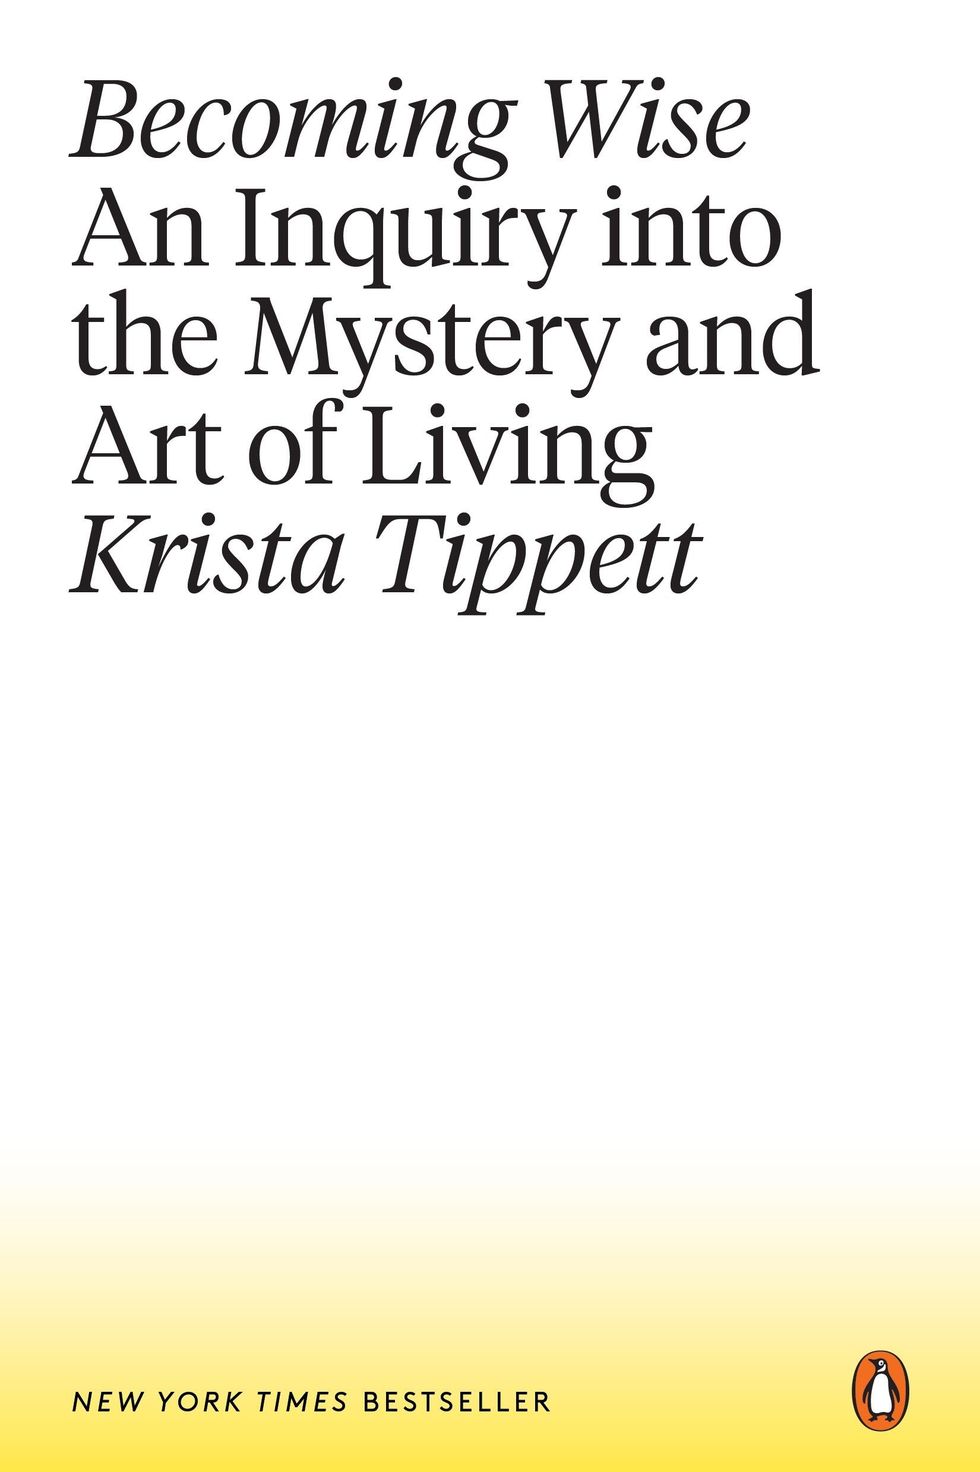 Becoming Wise: An Inquiry into the Mystery and Art of Living by Krista Tippett